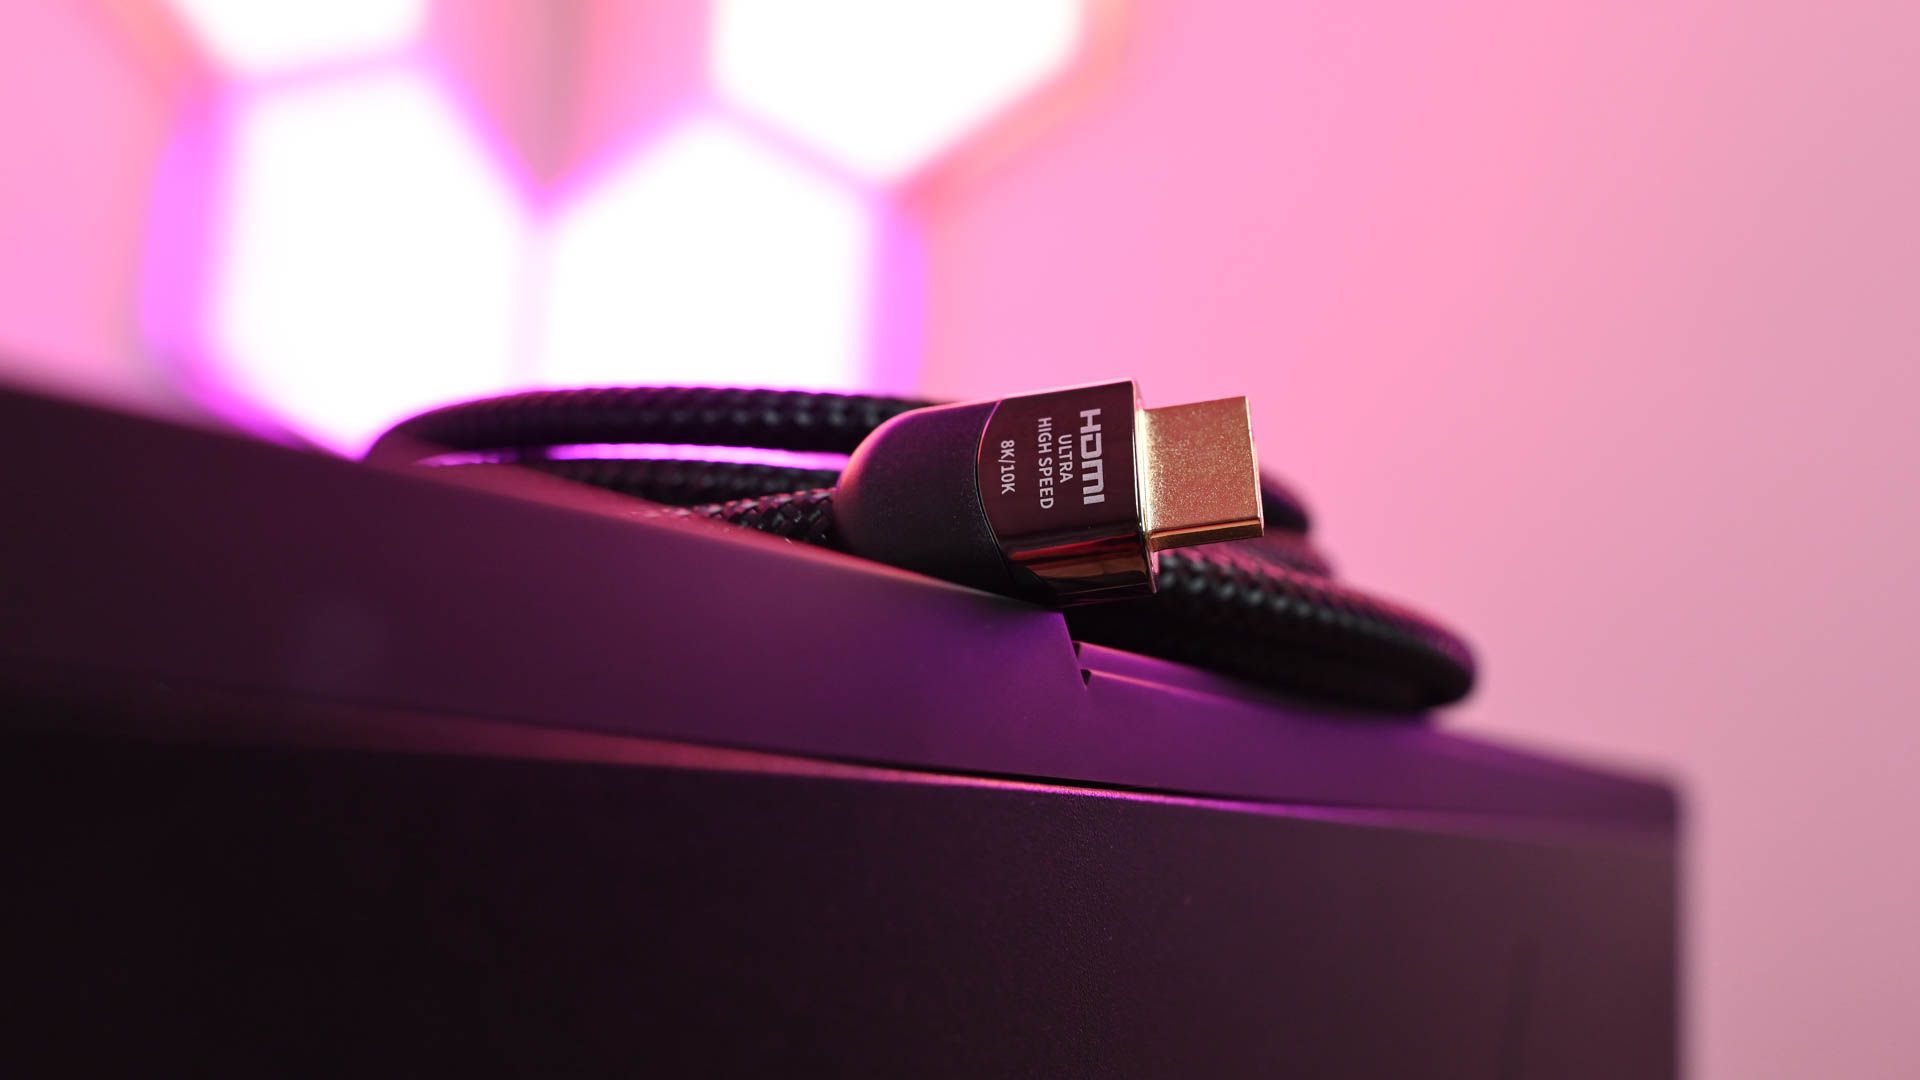 Zeskit Maya 8K High-Speed HDMI Cable laying on a computer